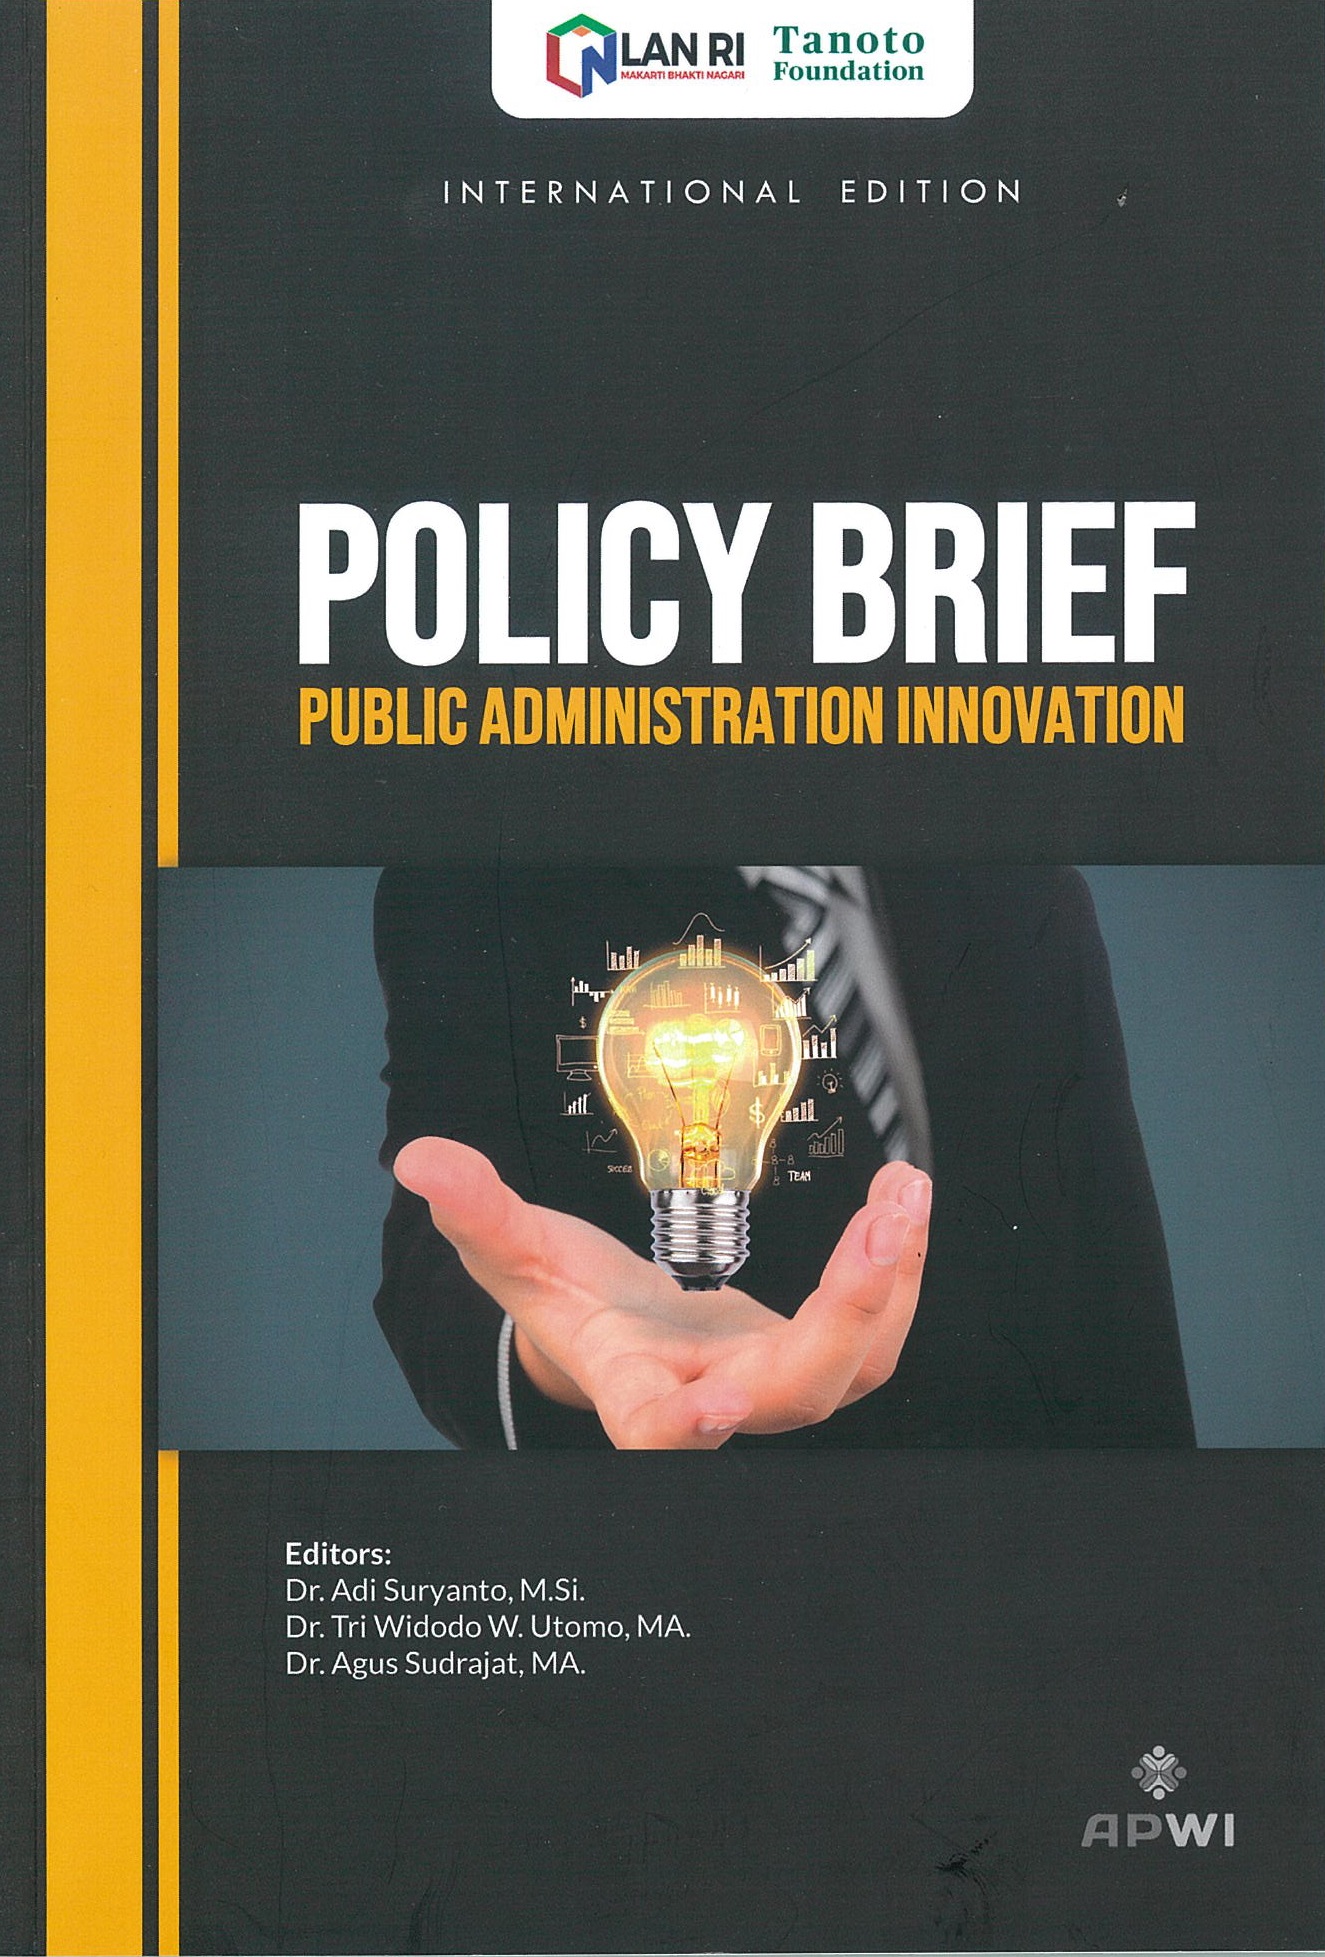 Policy brief public administration innovation